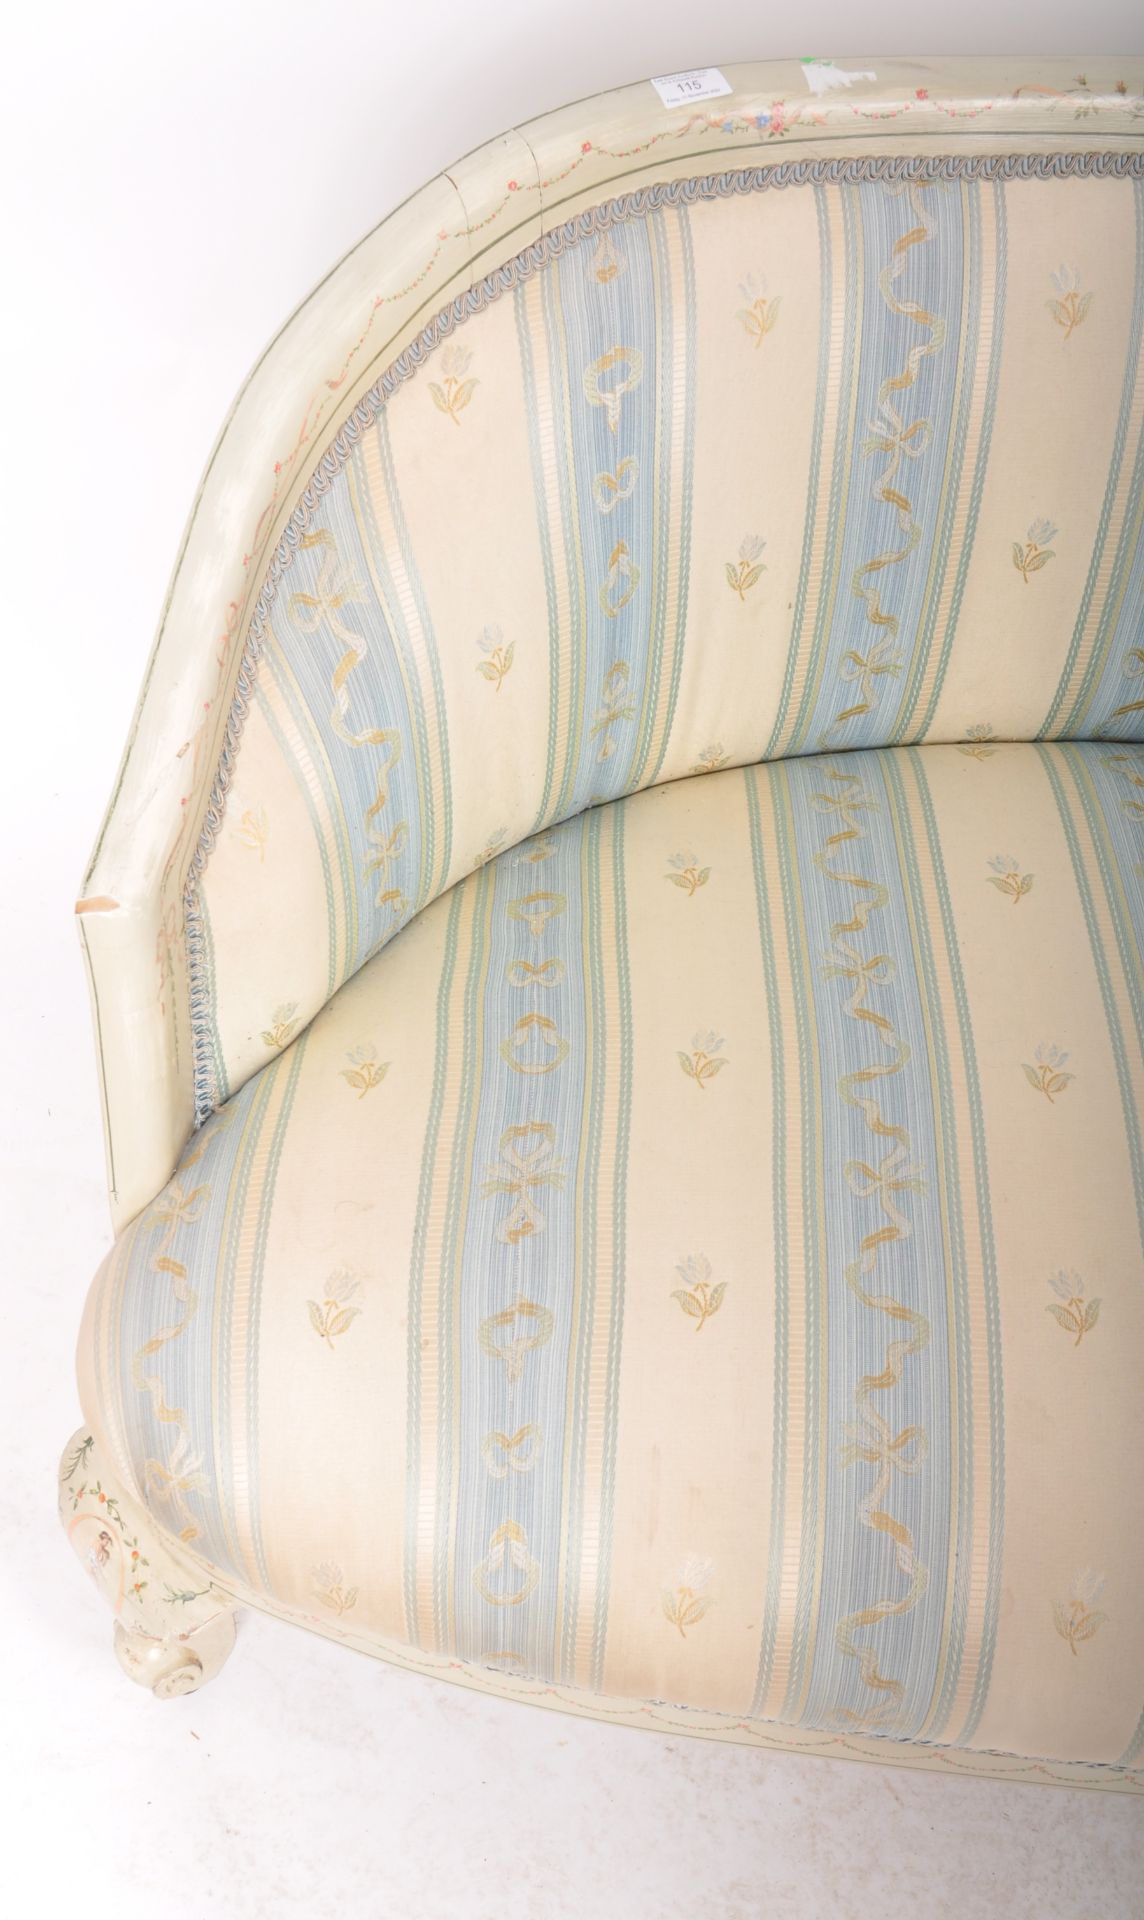 EARLY 20TH CENTURY LOUIS XVI CANAPE SOFA SETTEE - Image 9 of 9